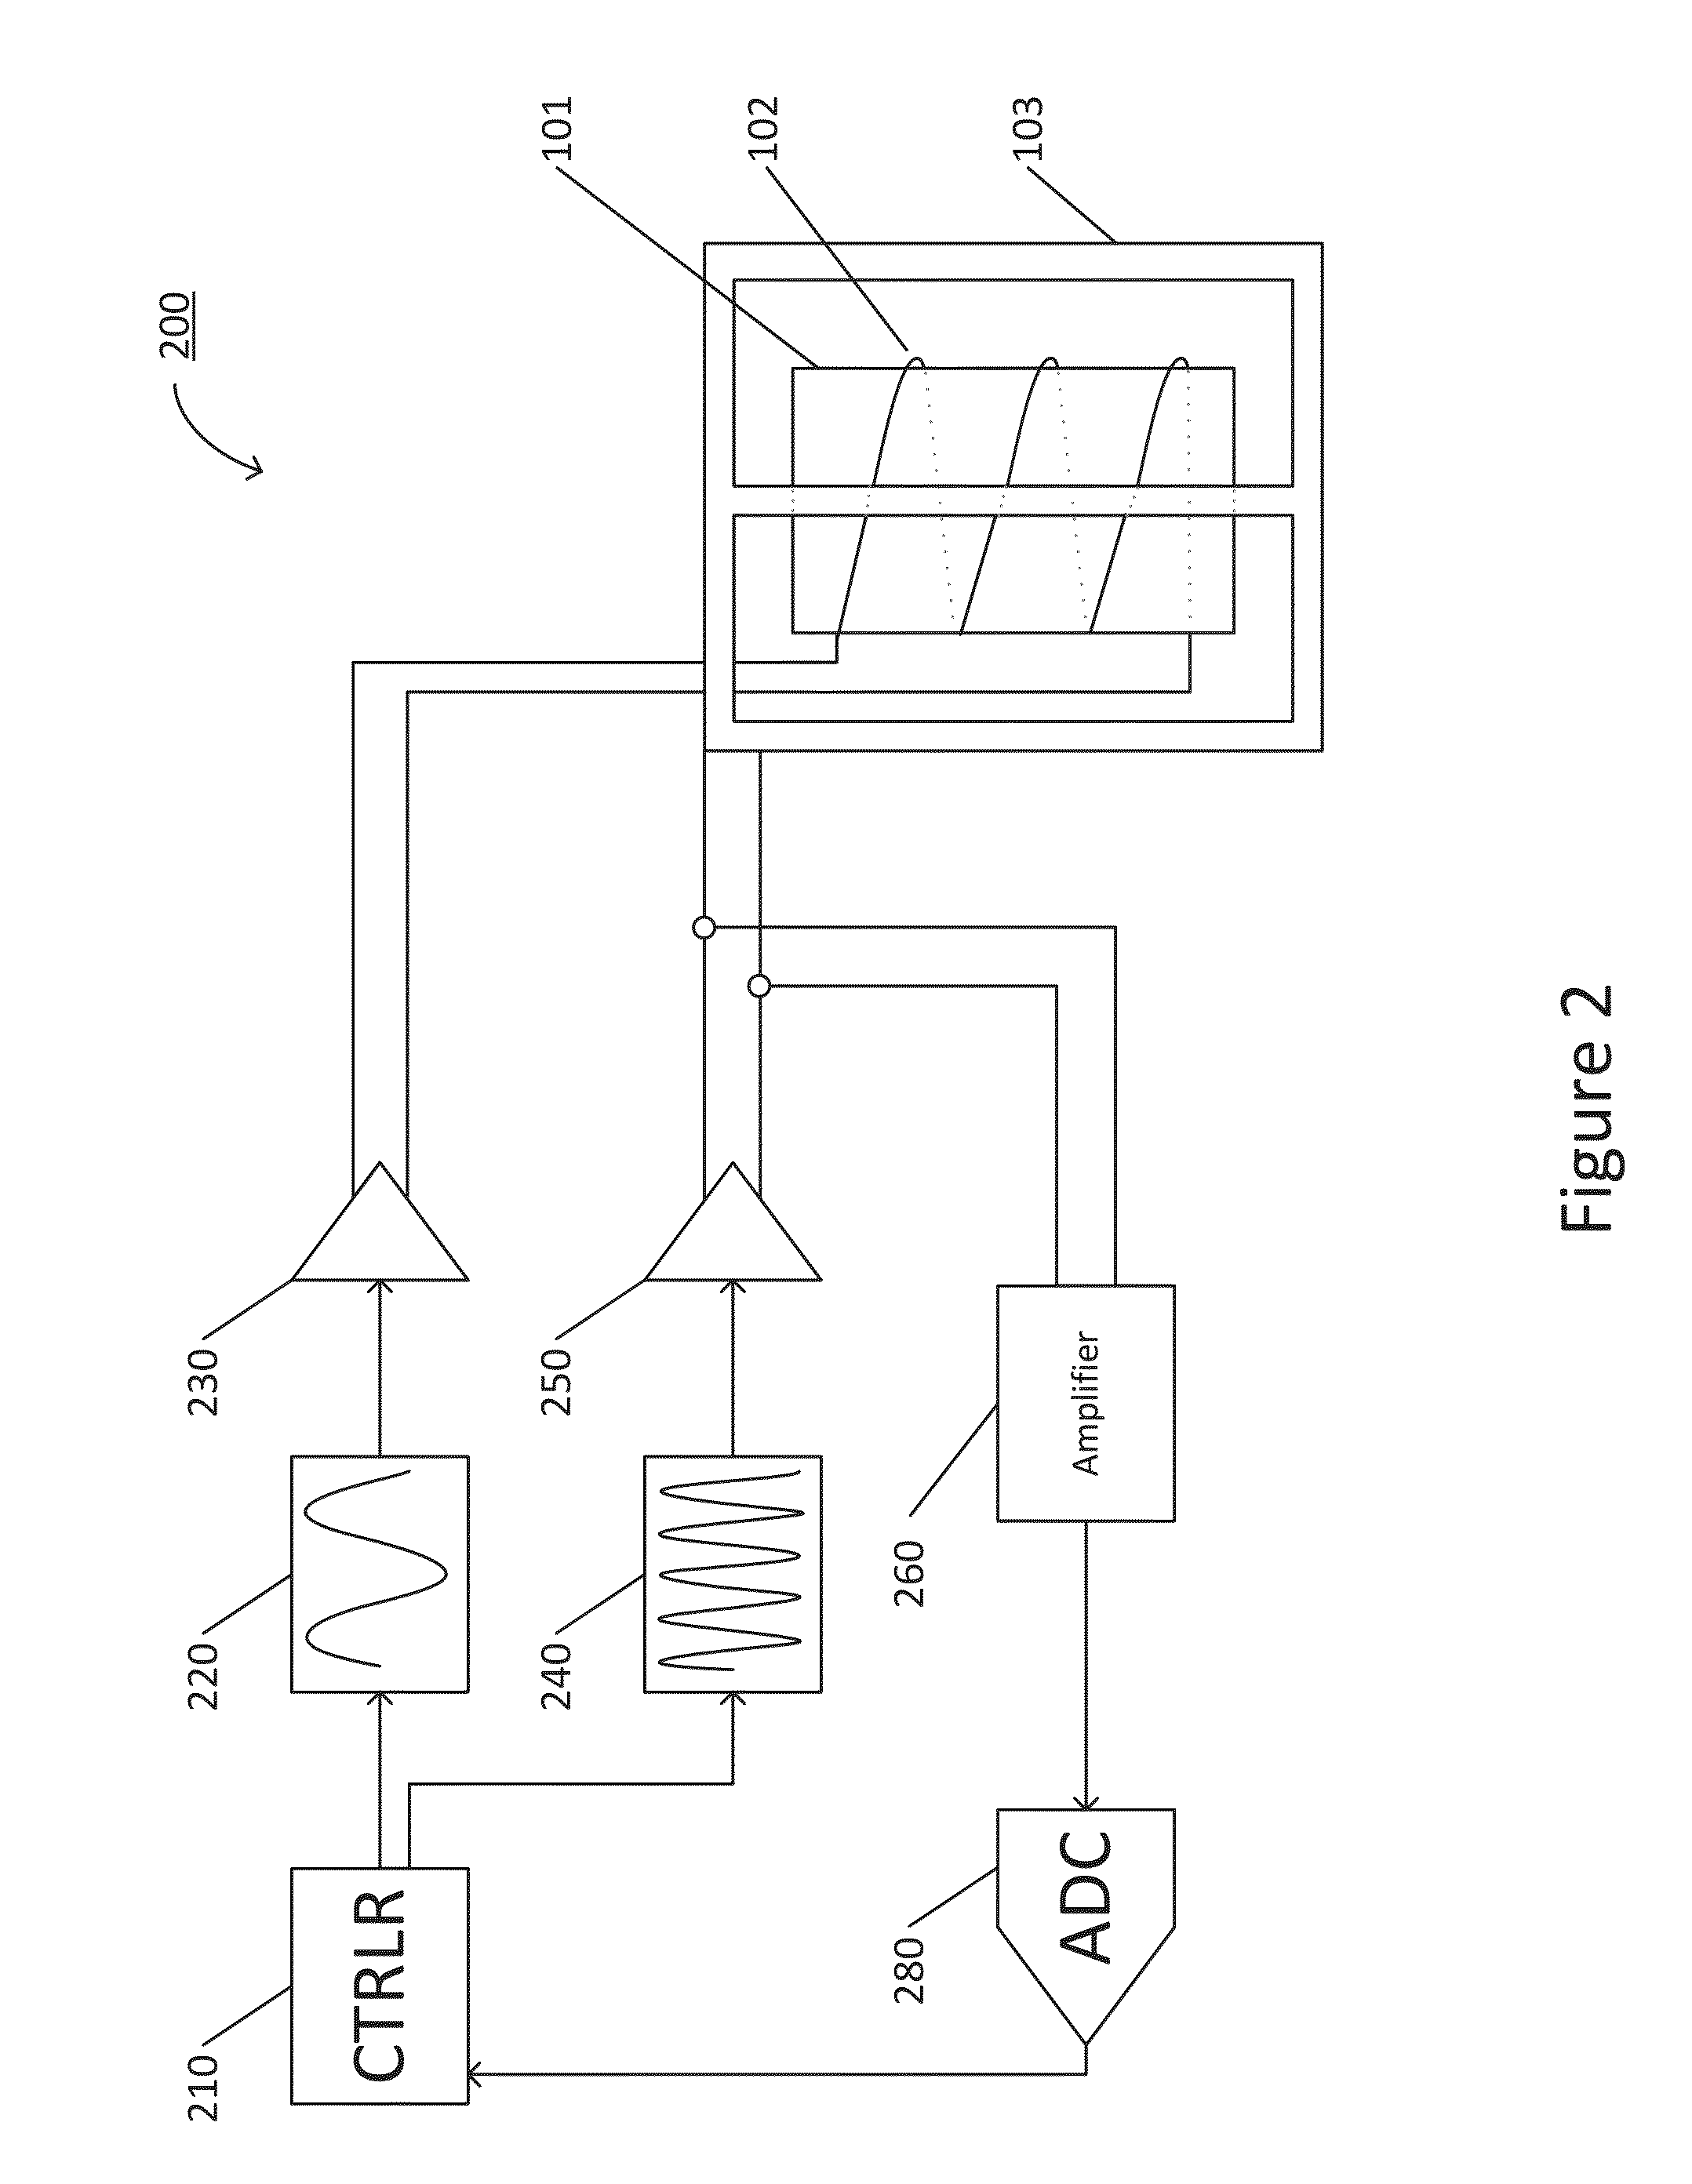 Apparatus and method for measuring velocity and composition of material in and adjacent to a borehole